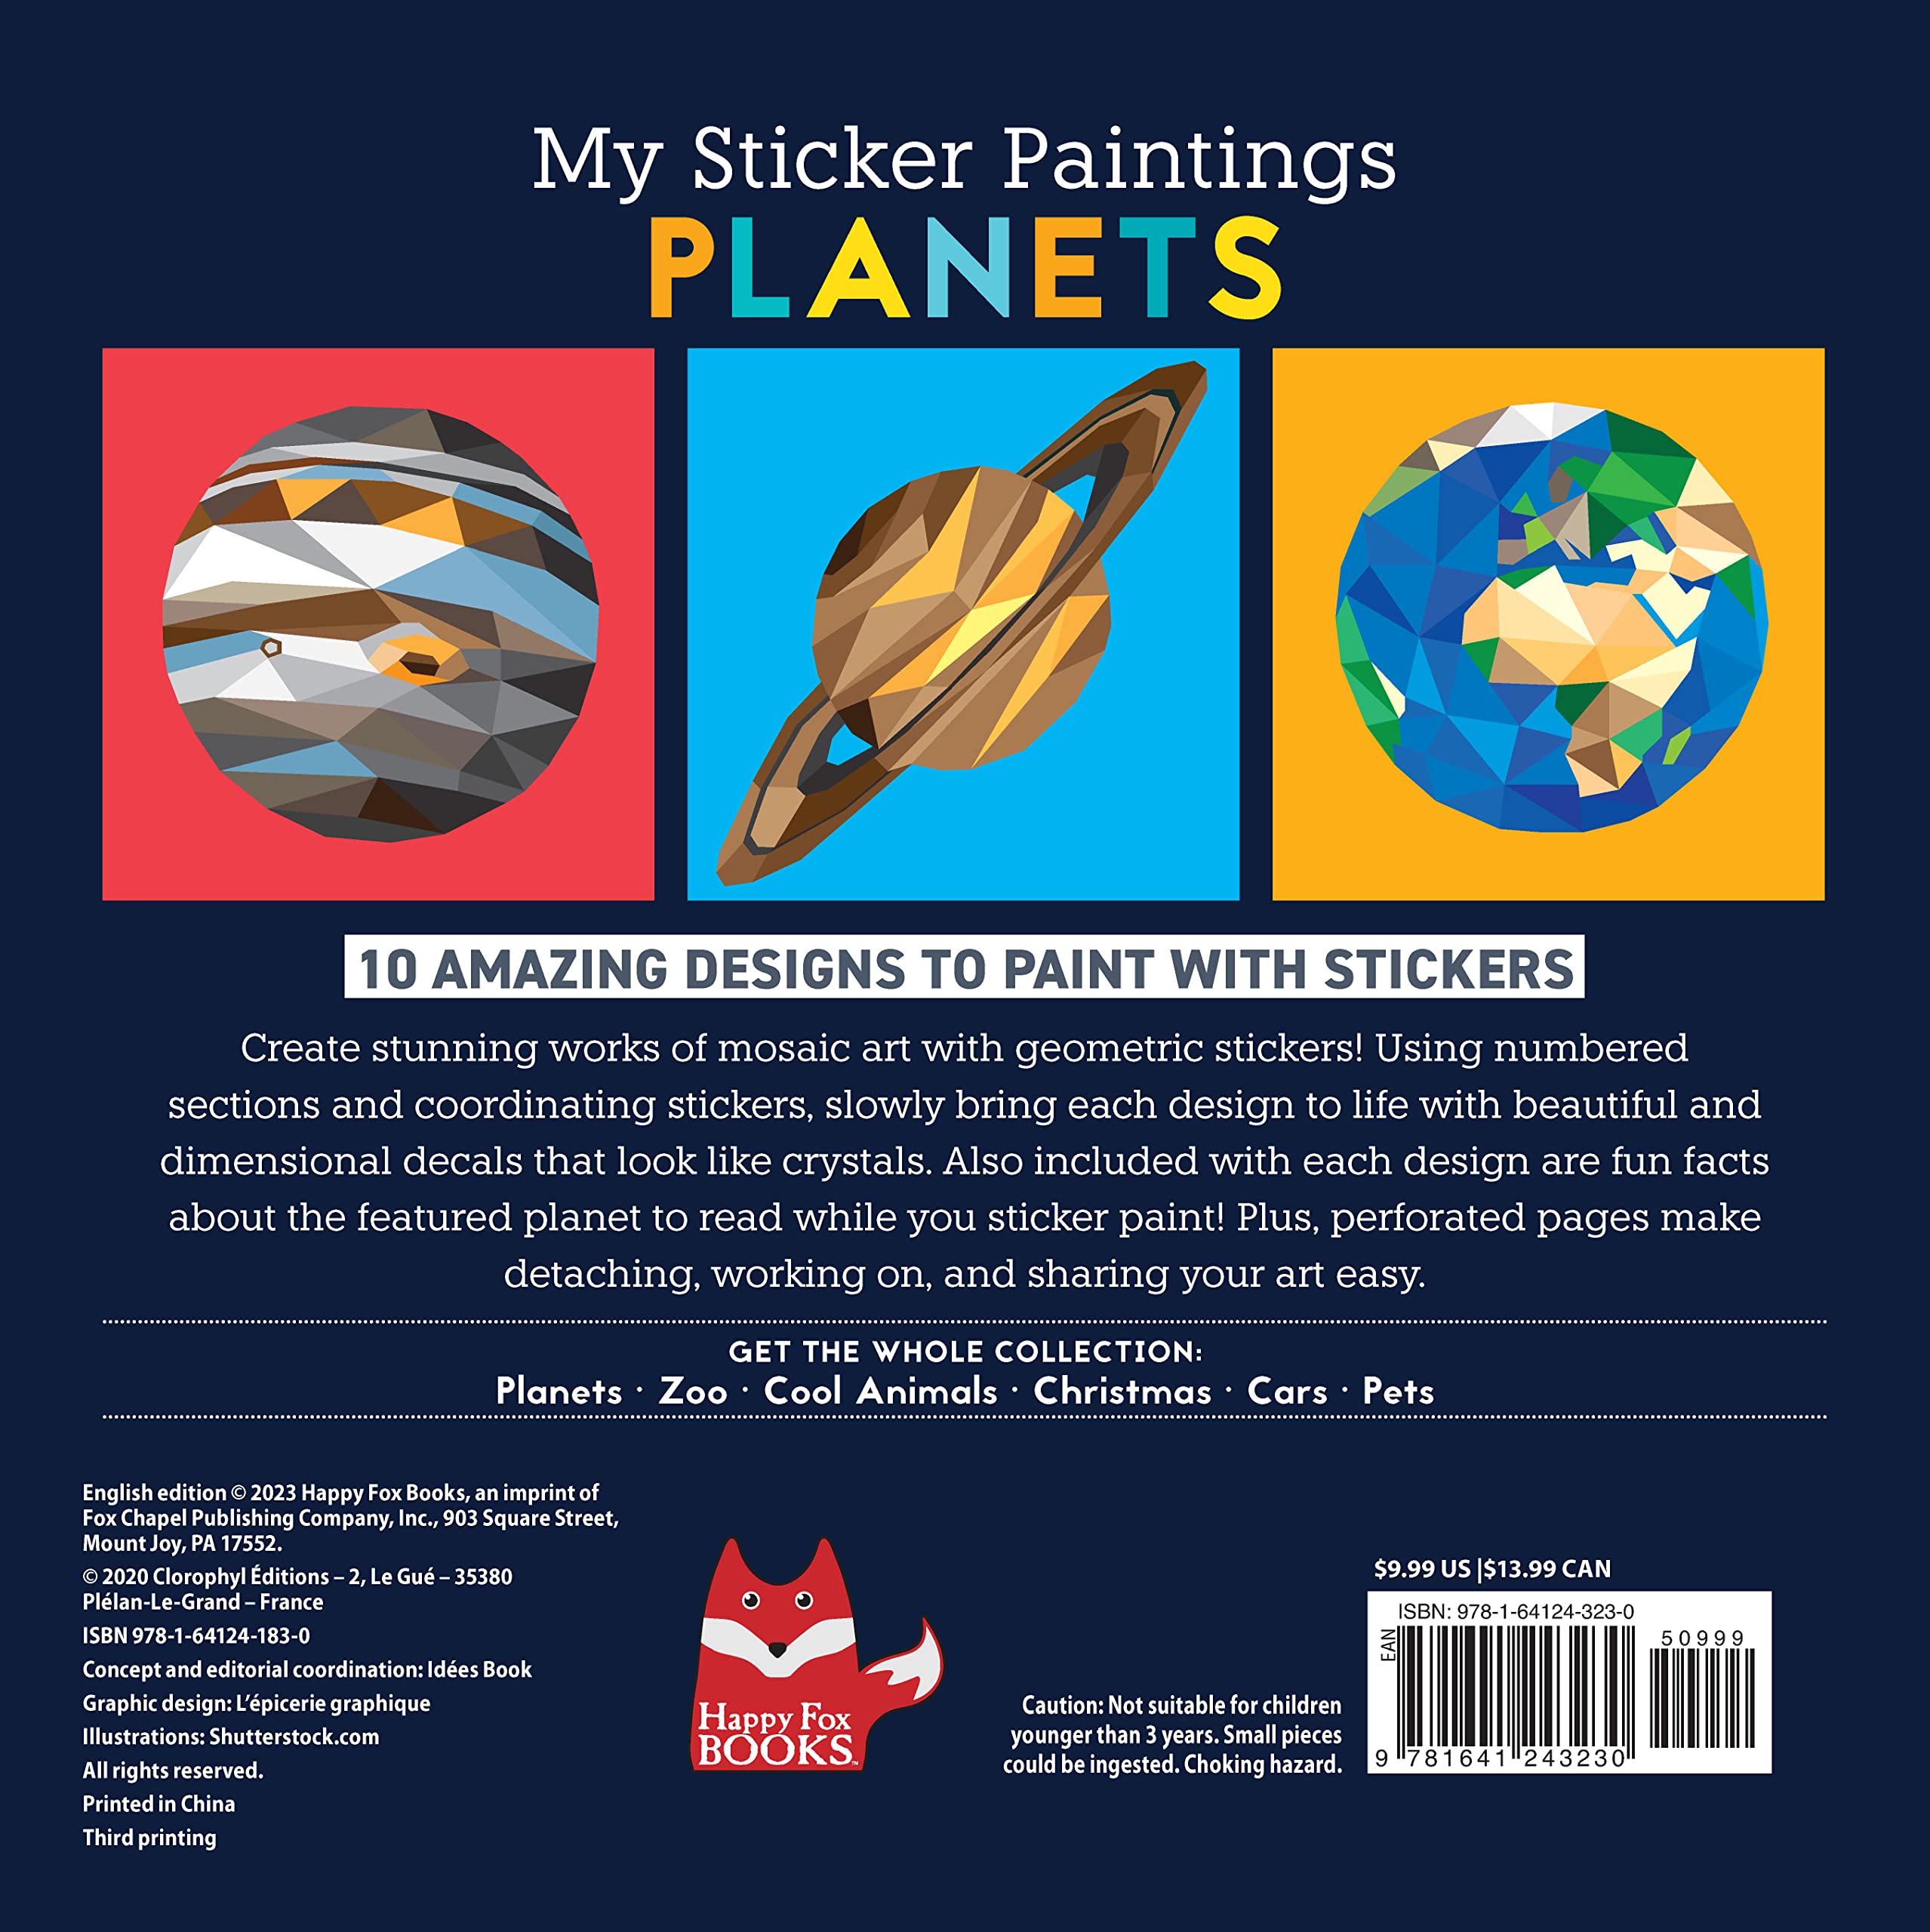 My Sticker Paintings: Planets: 10 Magnificent Paintings (Happy Fox Books) Paint by Sticker for Kids 6-10 - The Solar System from the Sun to Neptune, with 30-90 Removable, Reusable Stickers per Design